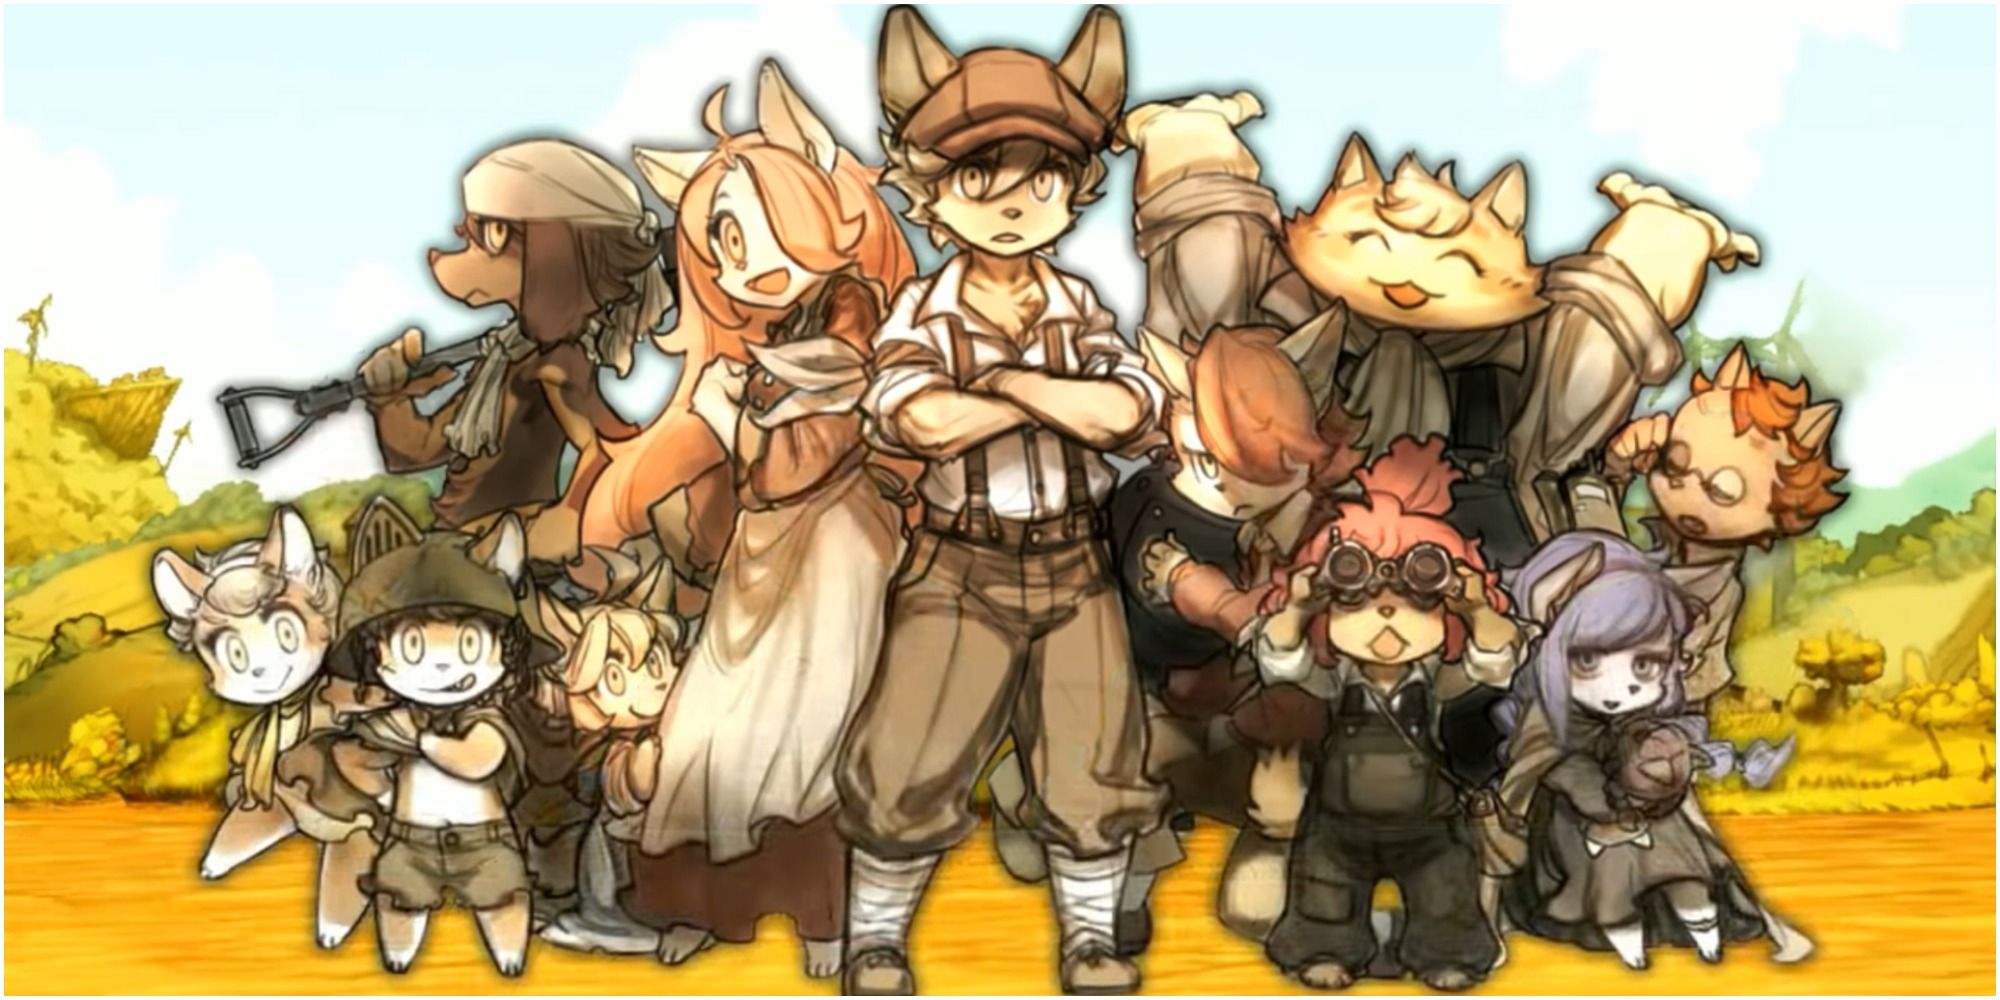 Promotional Artwork for Fuga: Melodies of Steel Featuring Several Main Characters Including (From Left to Right) Chick, Hack, Jin, Mei, Hanna, Malt, Kyle, Boron, Wappa, Sheena and Socks